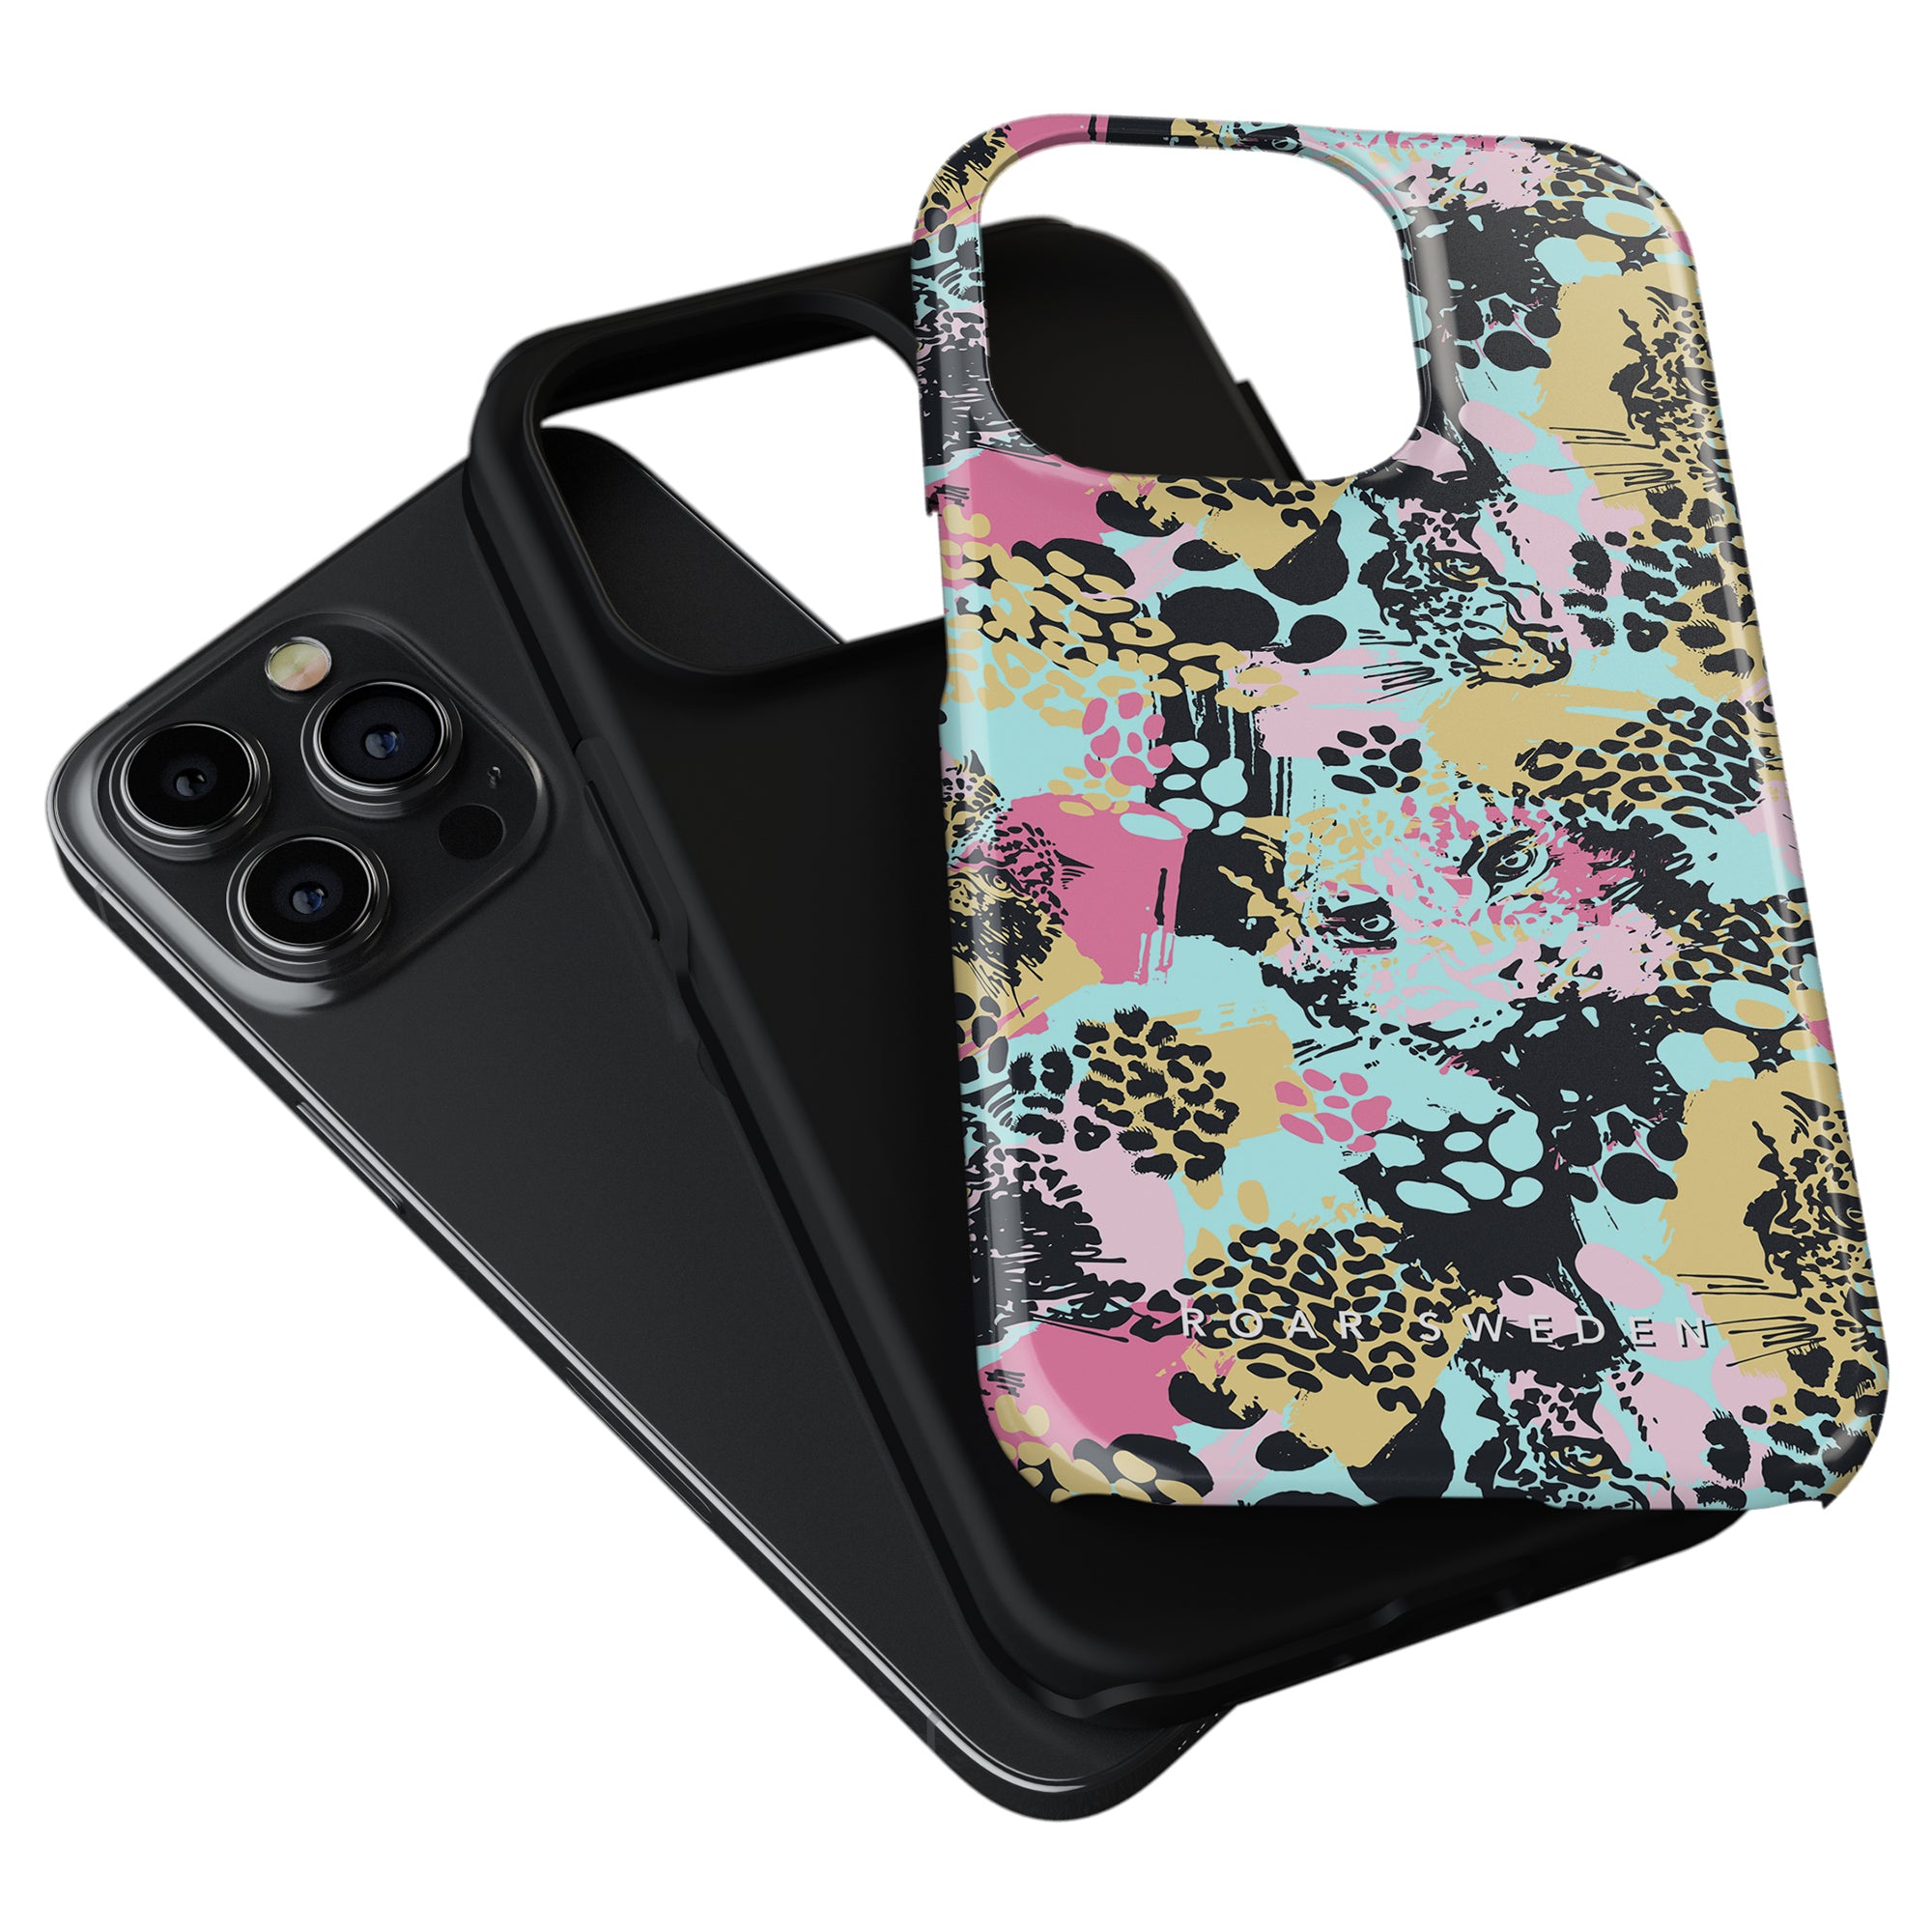 Two Bite - Tough Cases from the hybrid kollektion on a white background, one with a colorful abstract animal print and the other plain black, both designed for models with triple cameras.